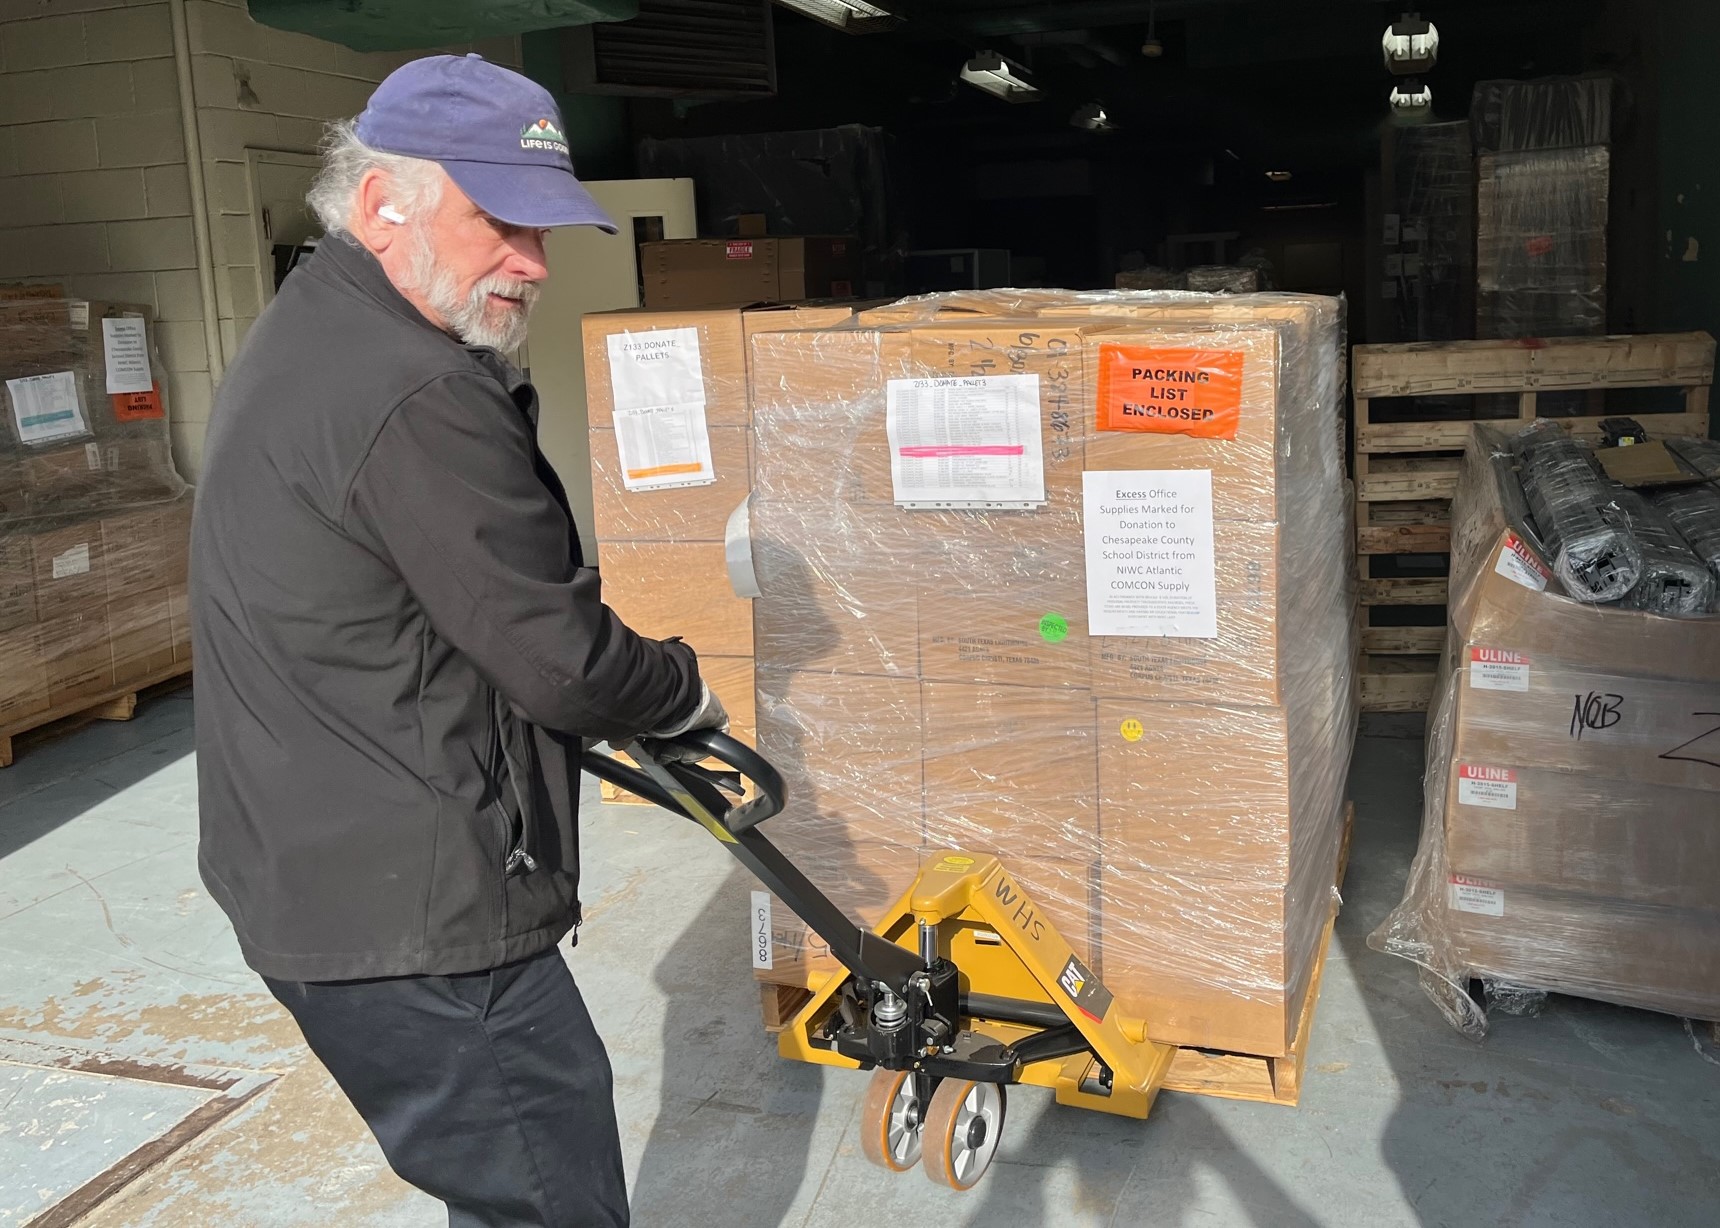 Man pulls a hand truck of boxes of office supplies